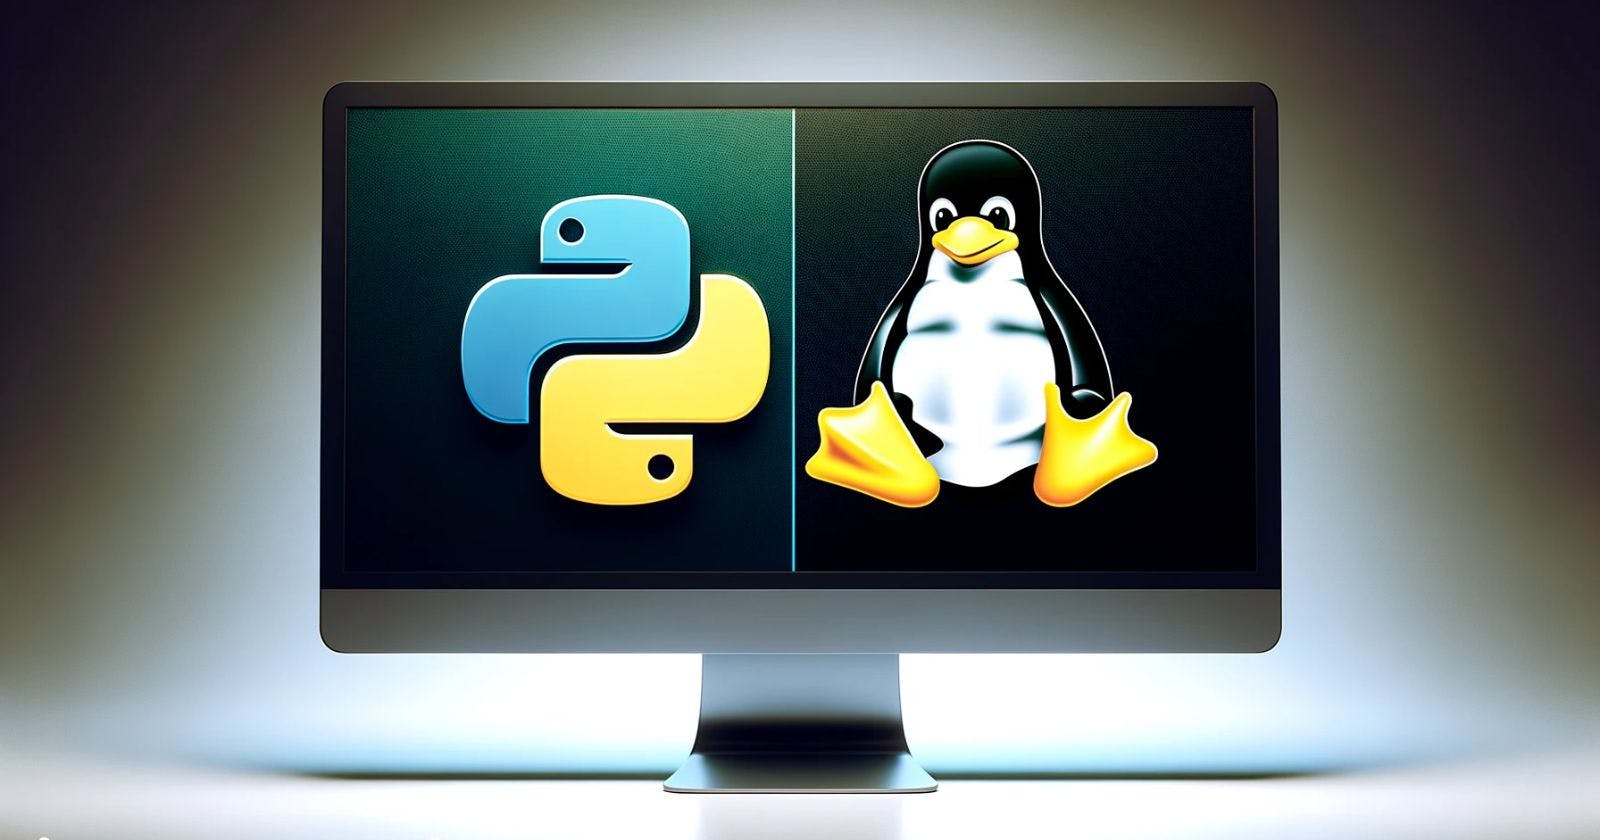 How to Add Python to Your PATH on Linux